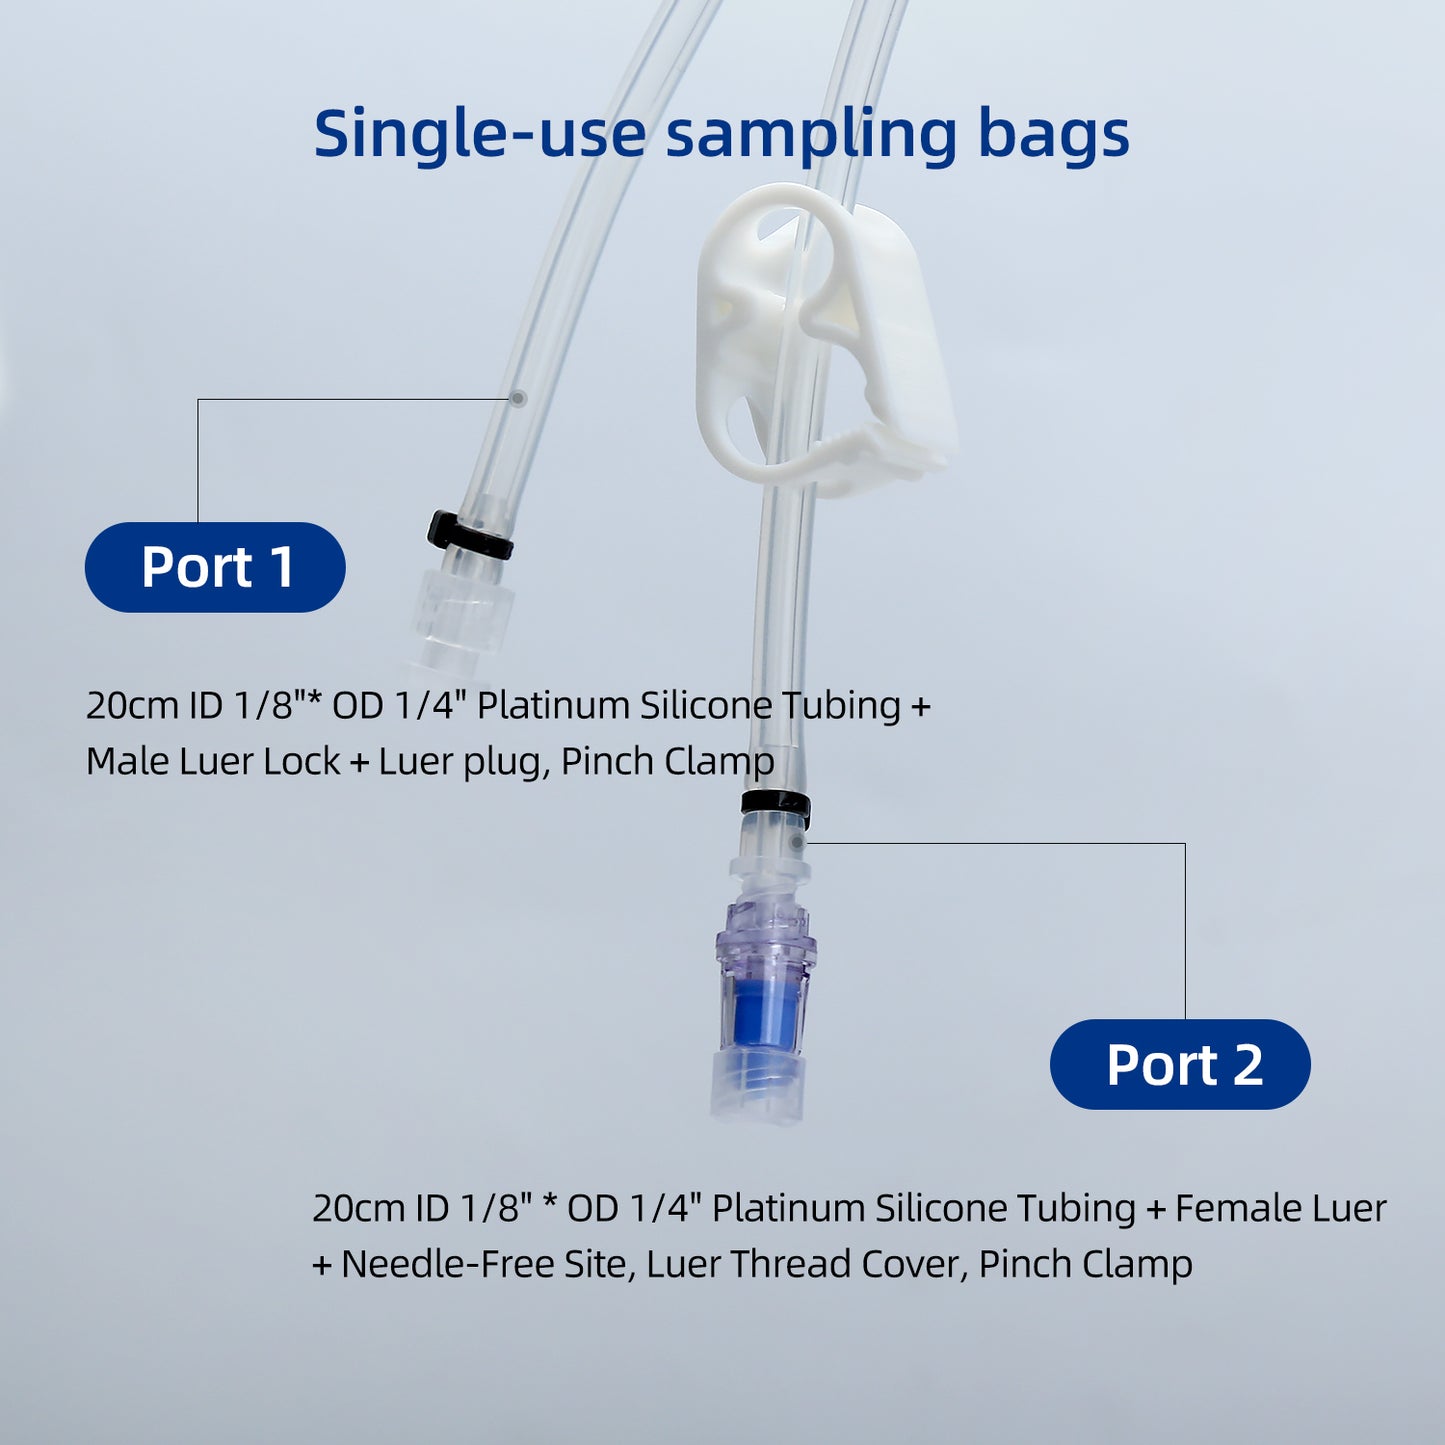 COBETTER 100mL Sampling Bag with 1/8"ID x 1/4"OD Tubing Sterile by Gamma Irradiation